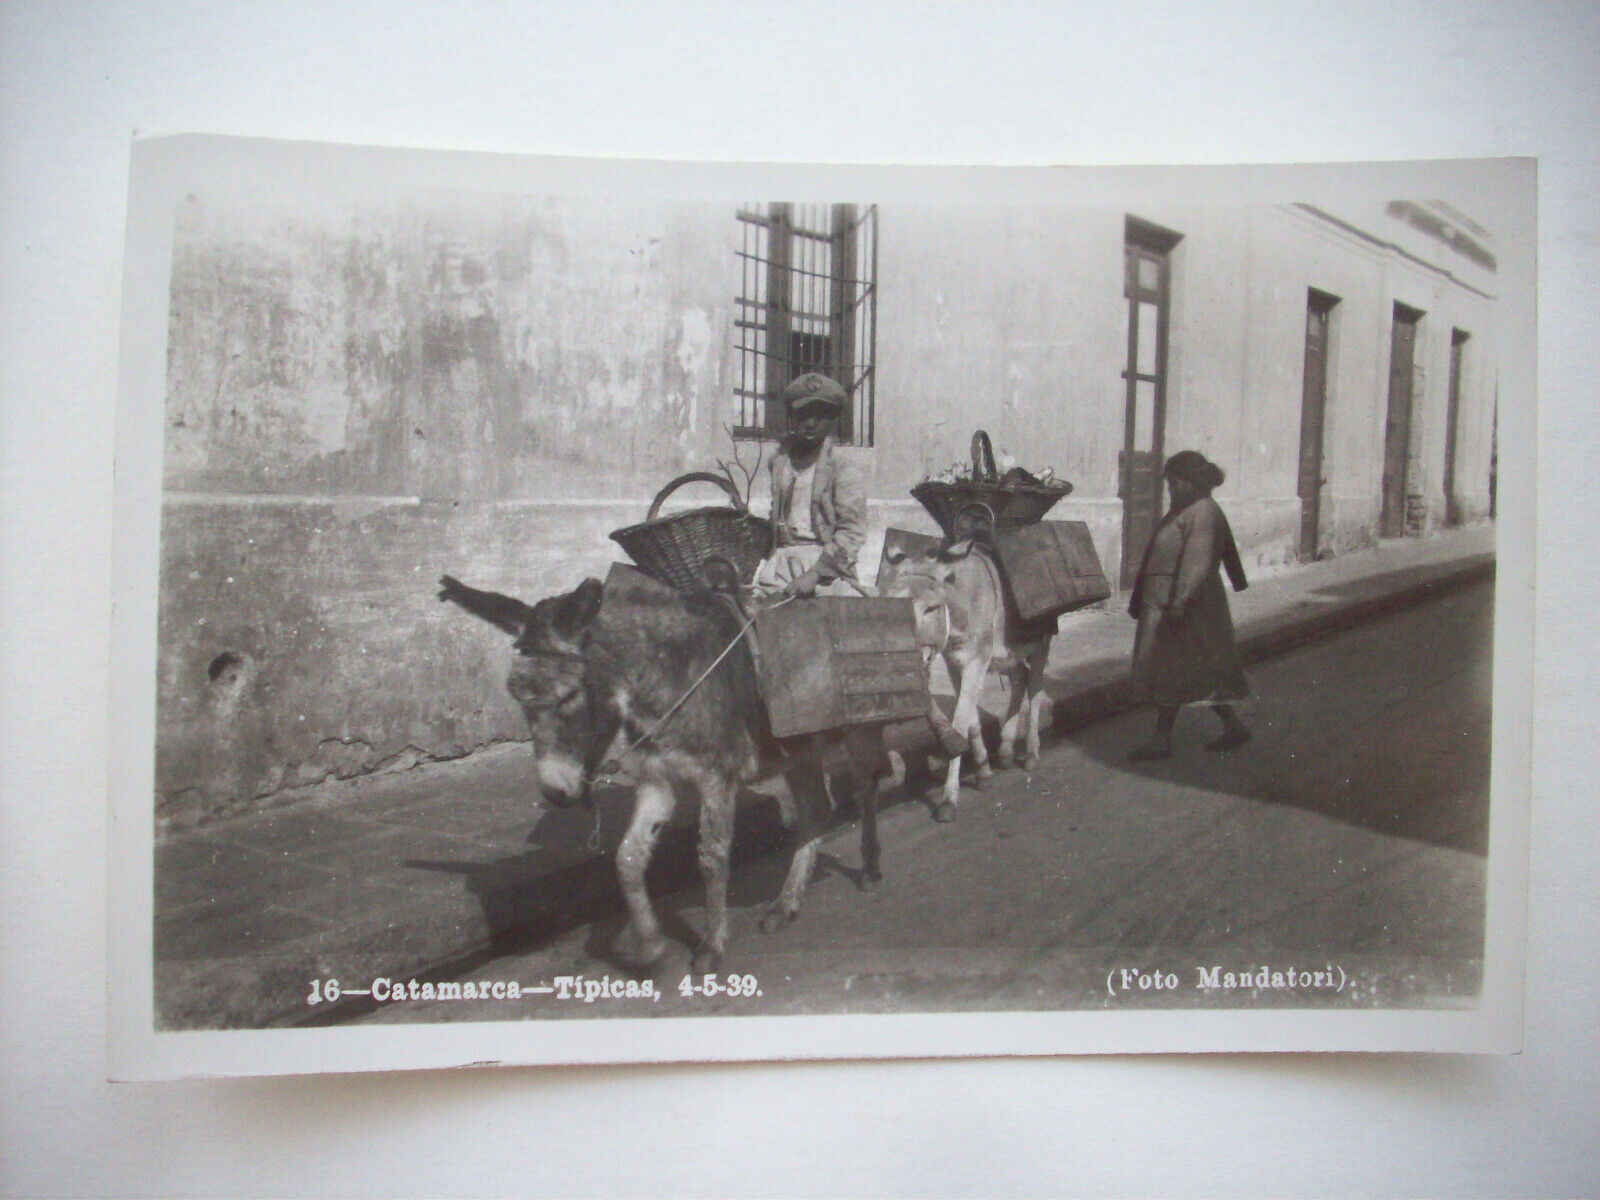 NATIVES WITH MULES - CATAMARCA-TIPICAS PHOTO